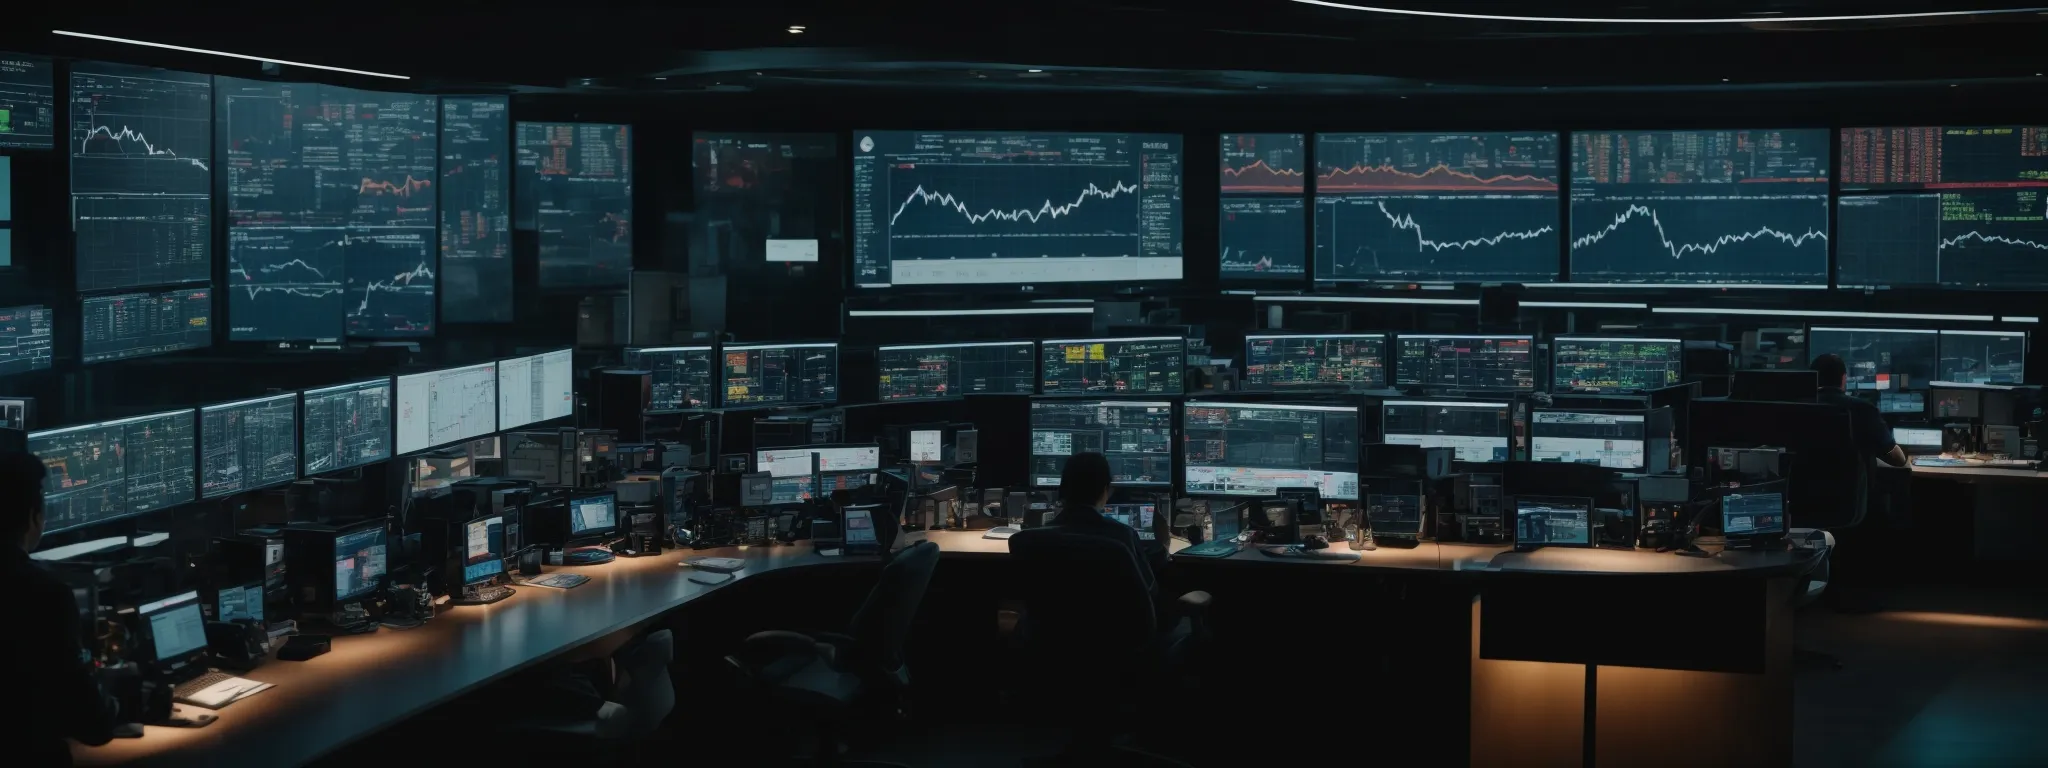  a sprawling, digitized control room with screens displaying graphs and geographic traffic data amid a team focusedly analyzing seo results.